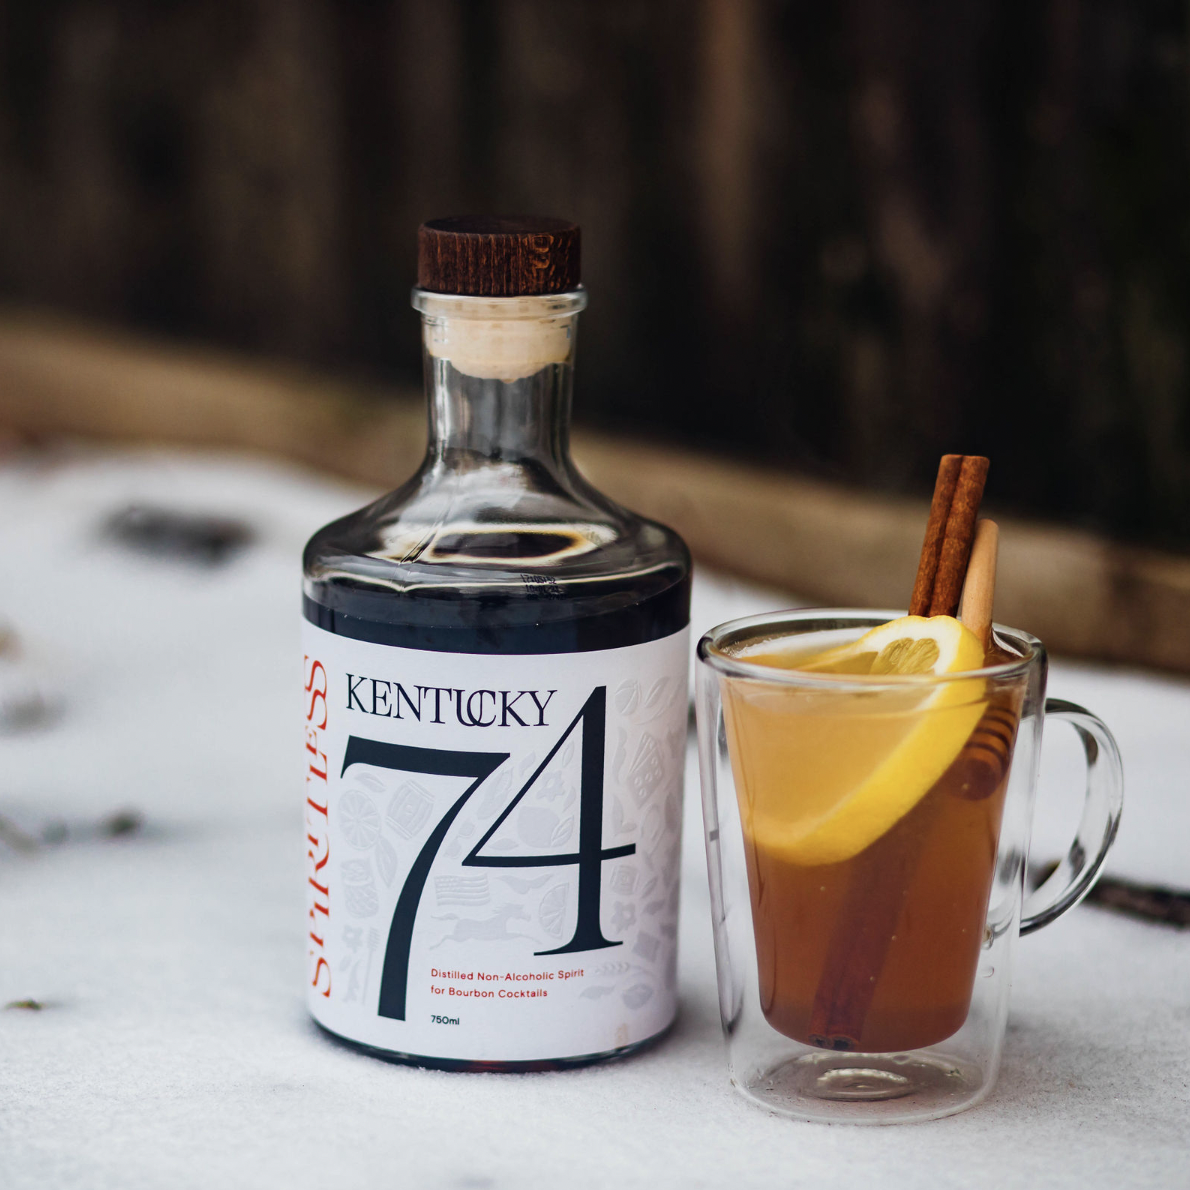 Our smoked tea hot toddy featuring Kentucky 74